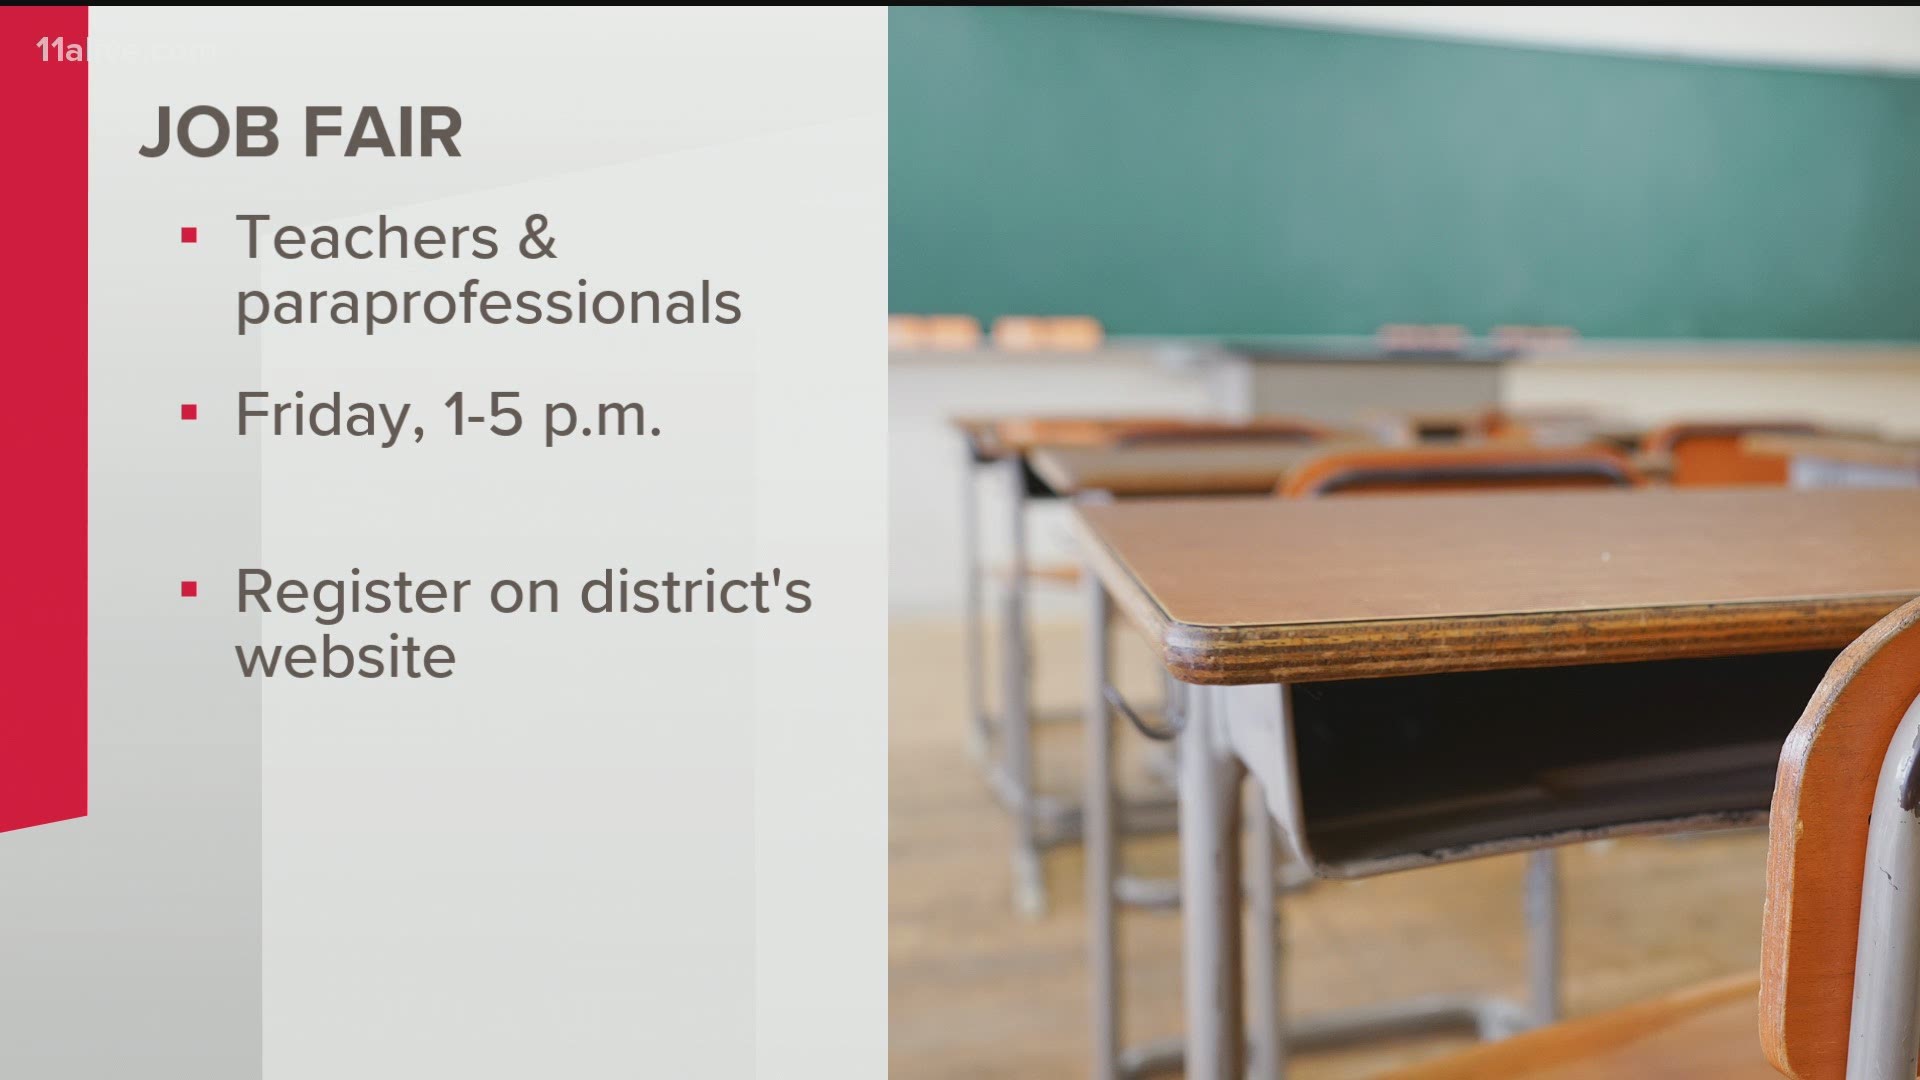 The district is hiring certified teachers.